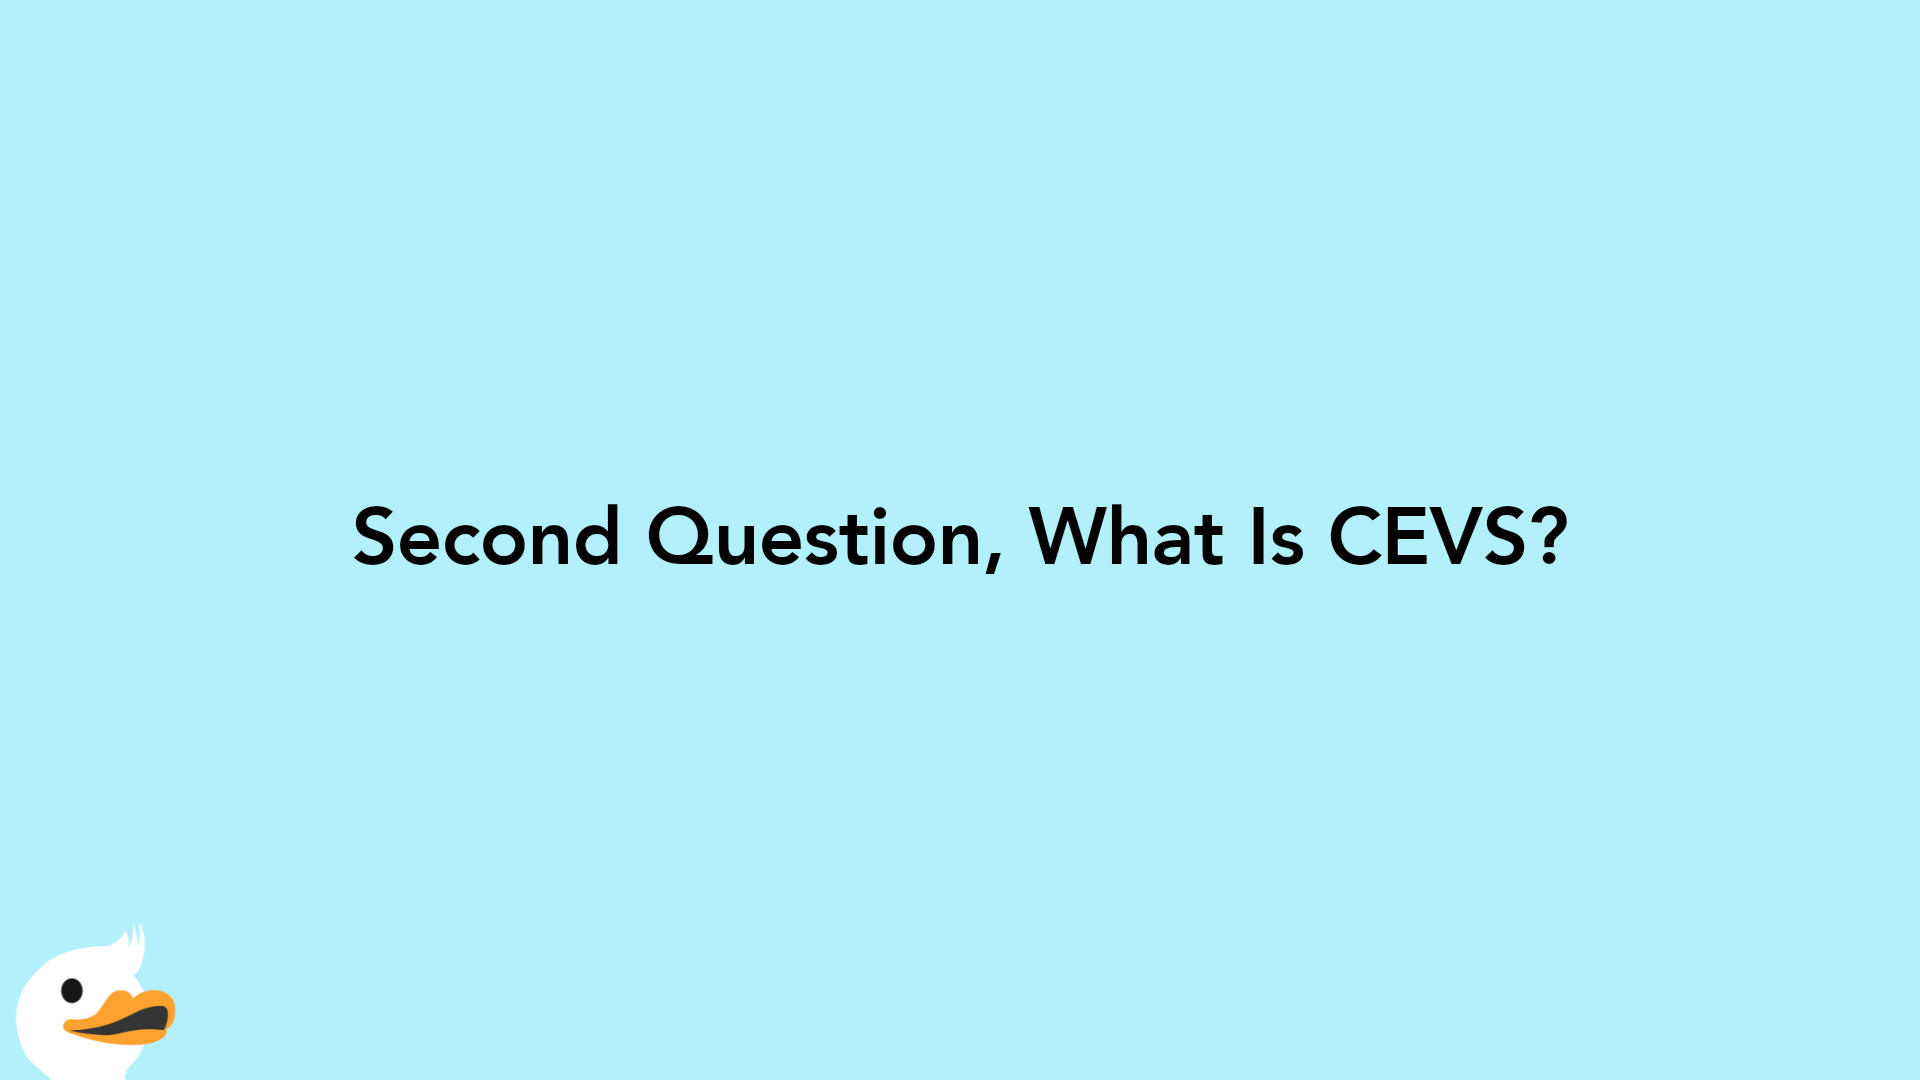 Second Question, What Is CEVS?